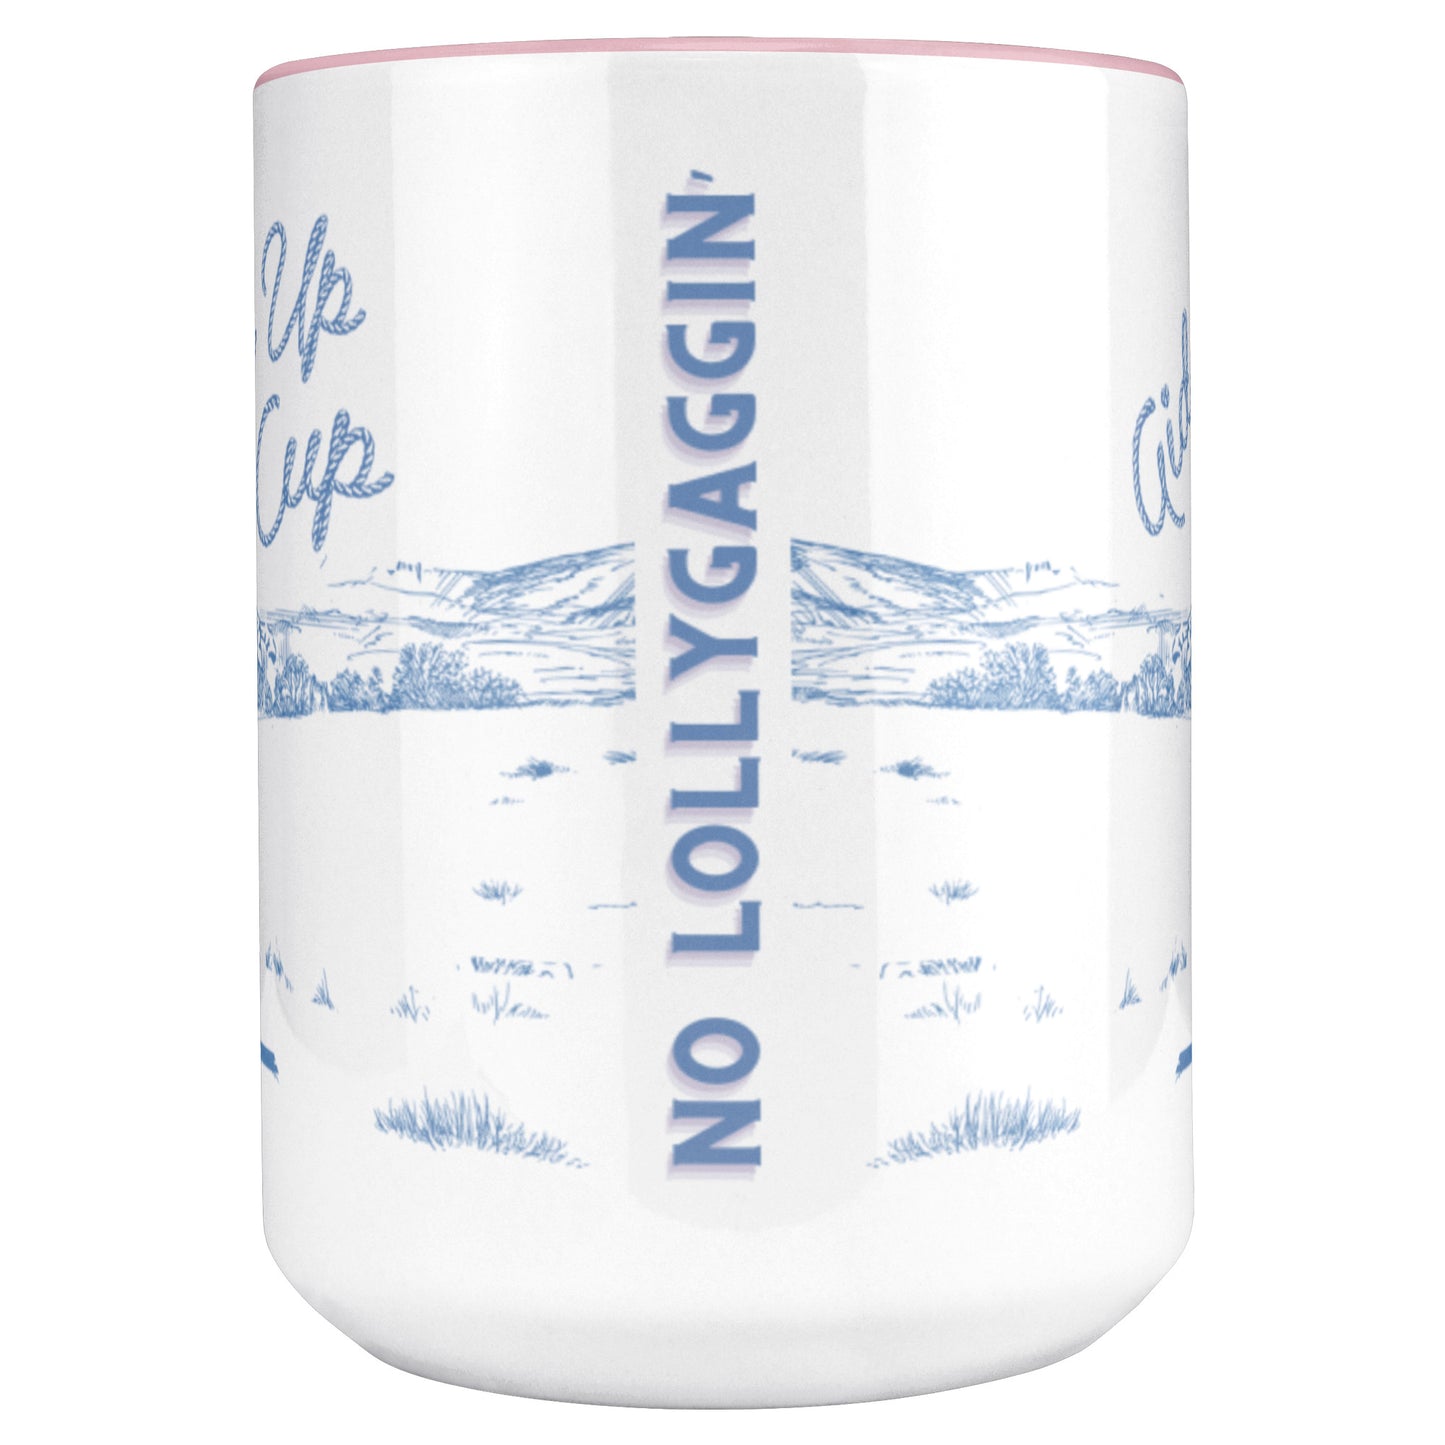 GIDDY UP CUP - PINK handle-- BLUE + PURPLE DESIGN